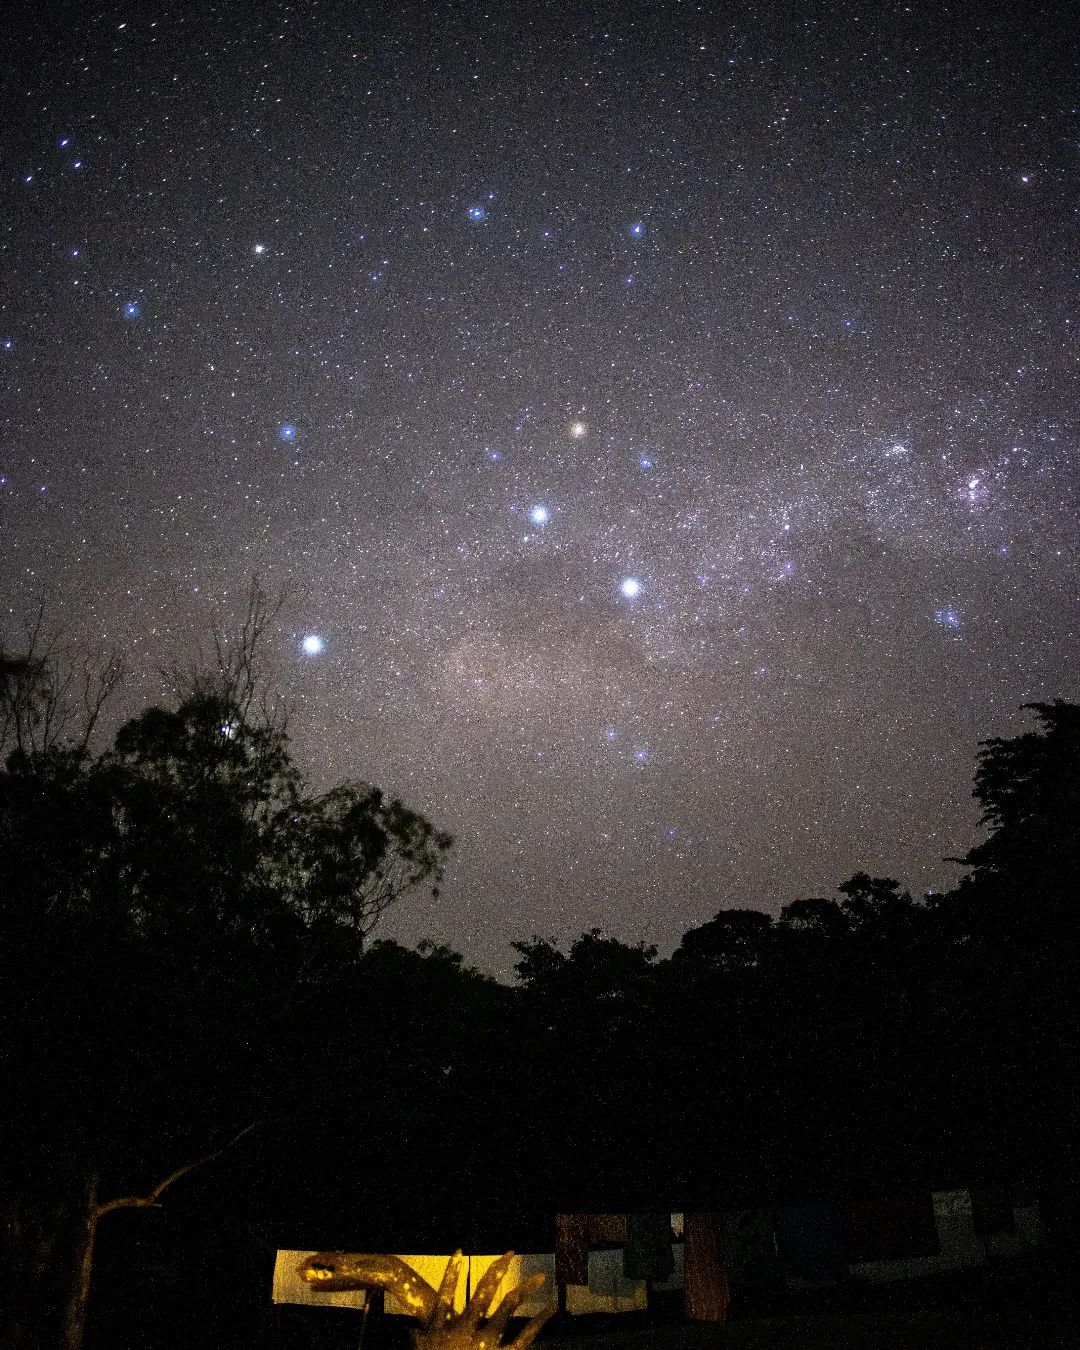 There's nothing more peaceful than looking up at the Milky way on a clear night. We often take a rug and some pillows outside and lay there for hours, counting shooting stars 💫#oneminutesouth #milkyway #stars #island #equator #uganda #ugandapics #lakevictoria #holiday #islandvilla #islandholiday #bulagoisland #night #stargaze #bliss #silence @milkywaychasers @best_places_ug